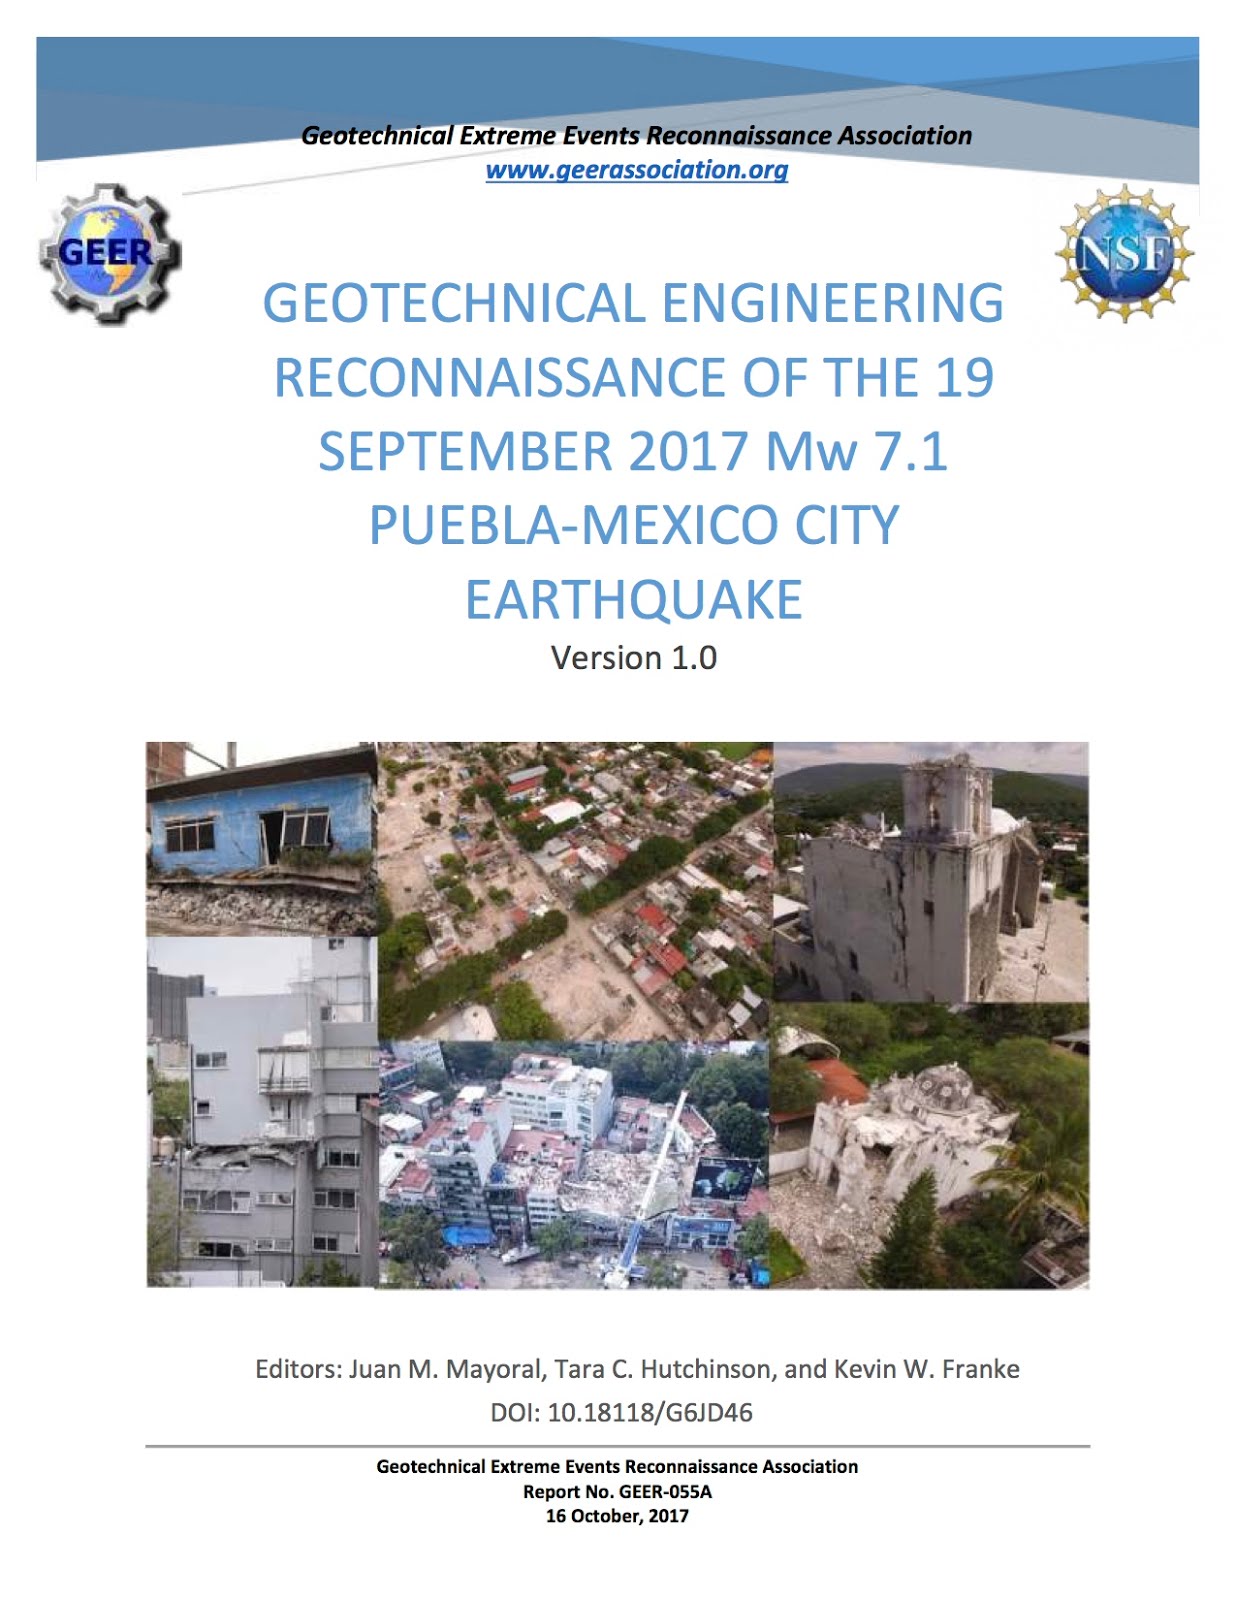 GEOTECHNICAL ENGINEERING RECONNAISSANCE OF THE 19 SEPTEMBER 2017 Mw 7.1 PUEBLA-MEXICO CITY EARTHQUA